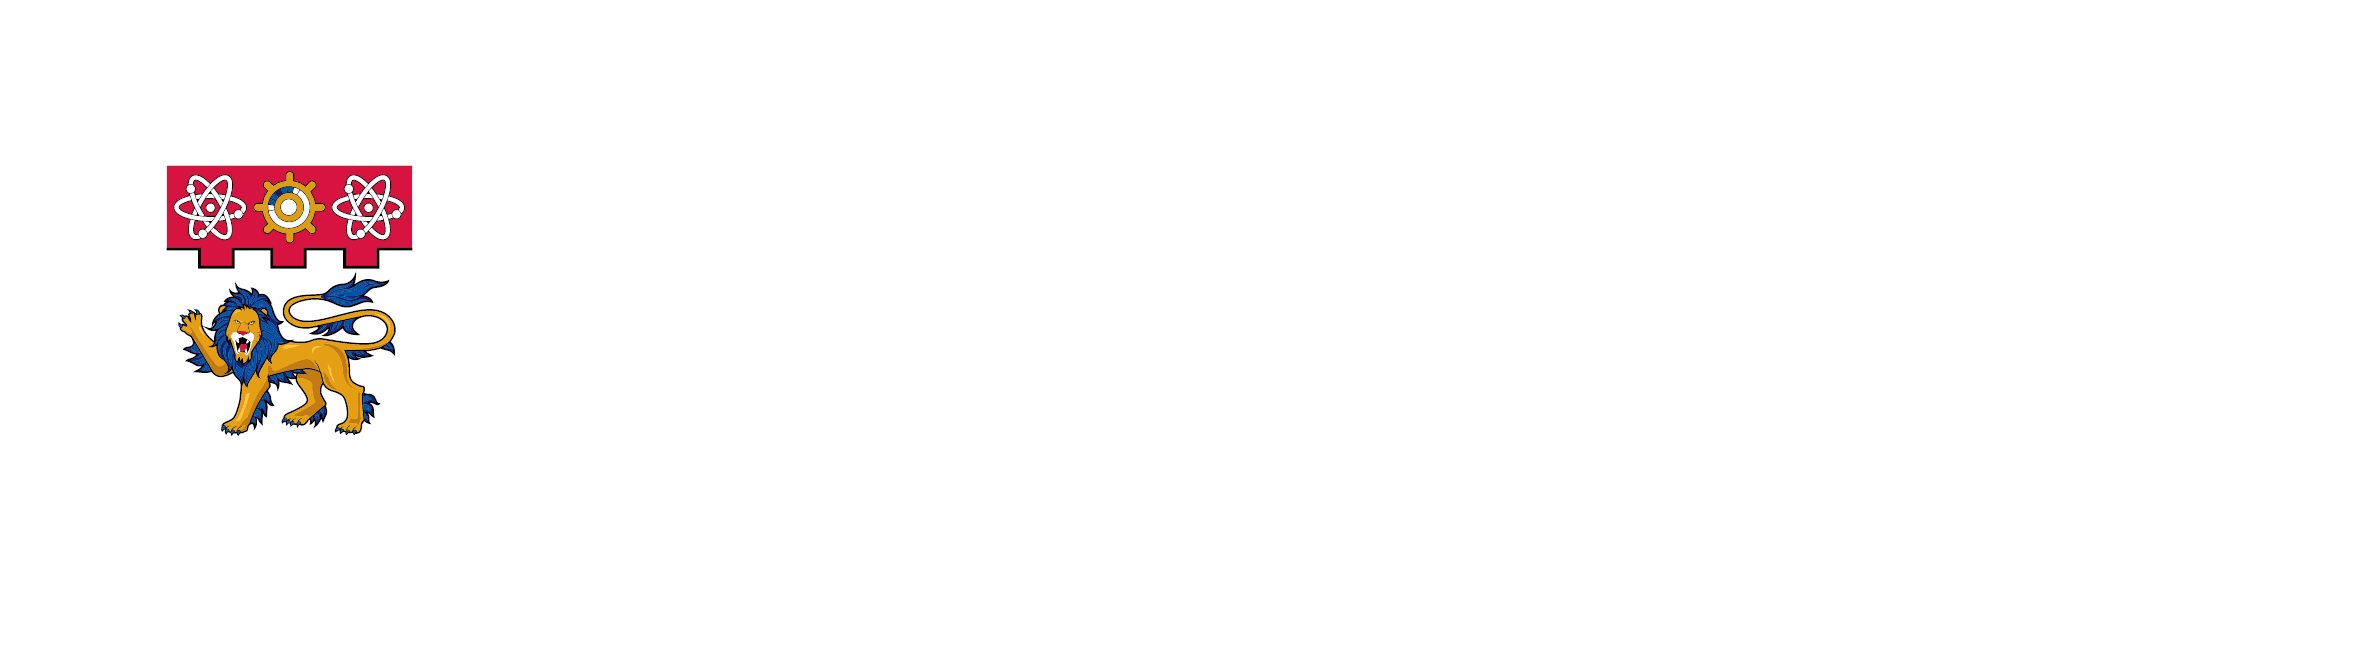 Wee Kim Wee School of Communication and Information